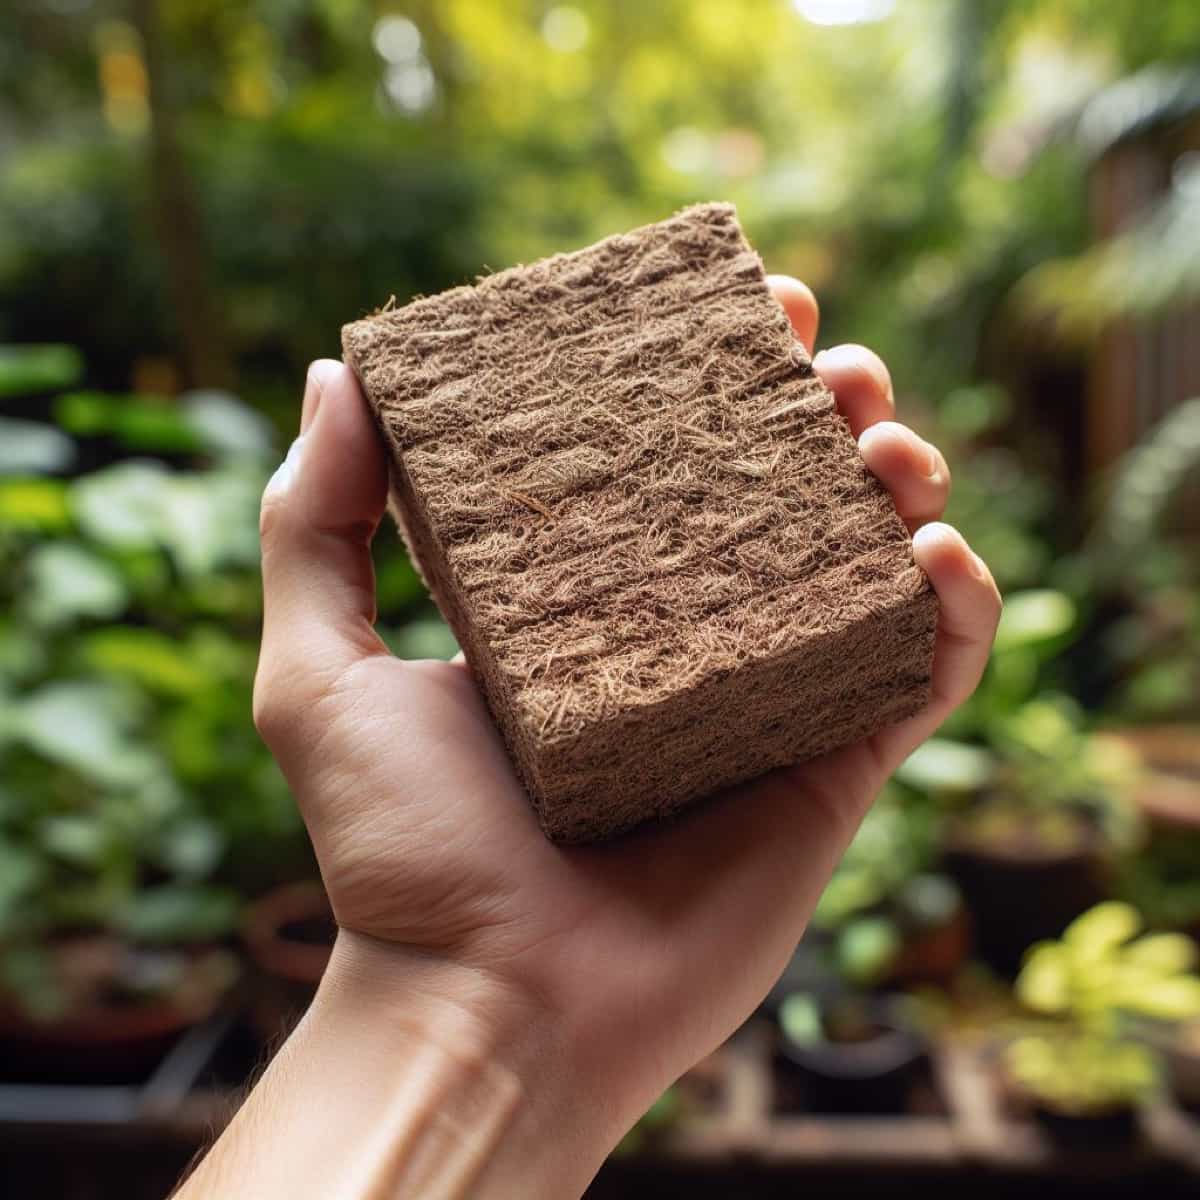 15 Best Cocopeat Blocks in India: Best Cocopeat Block Brands of 1kg, 5kg and 10kg with Price List